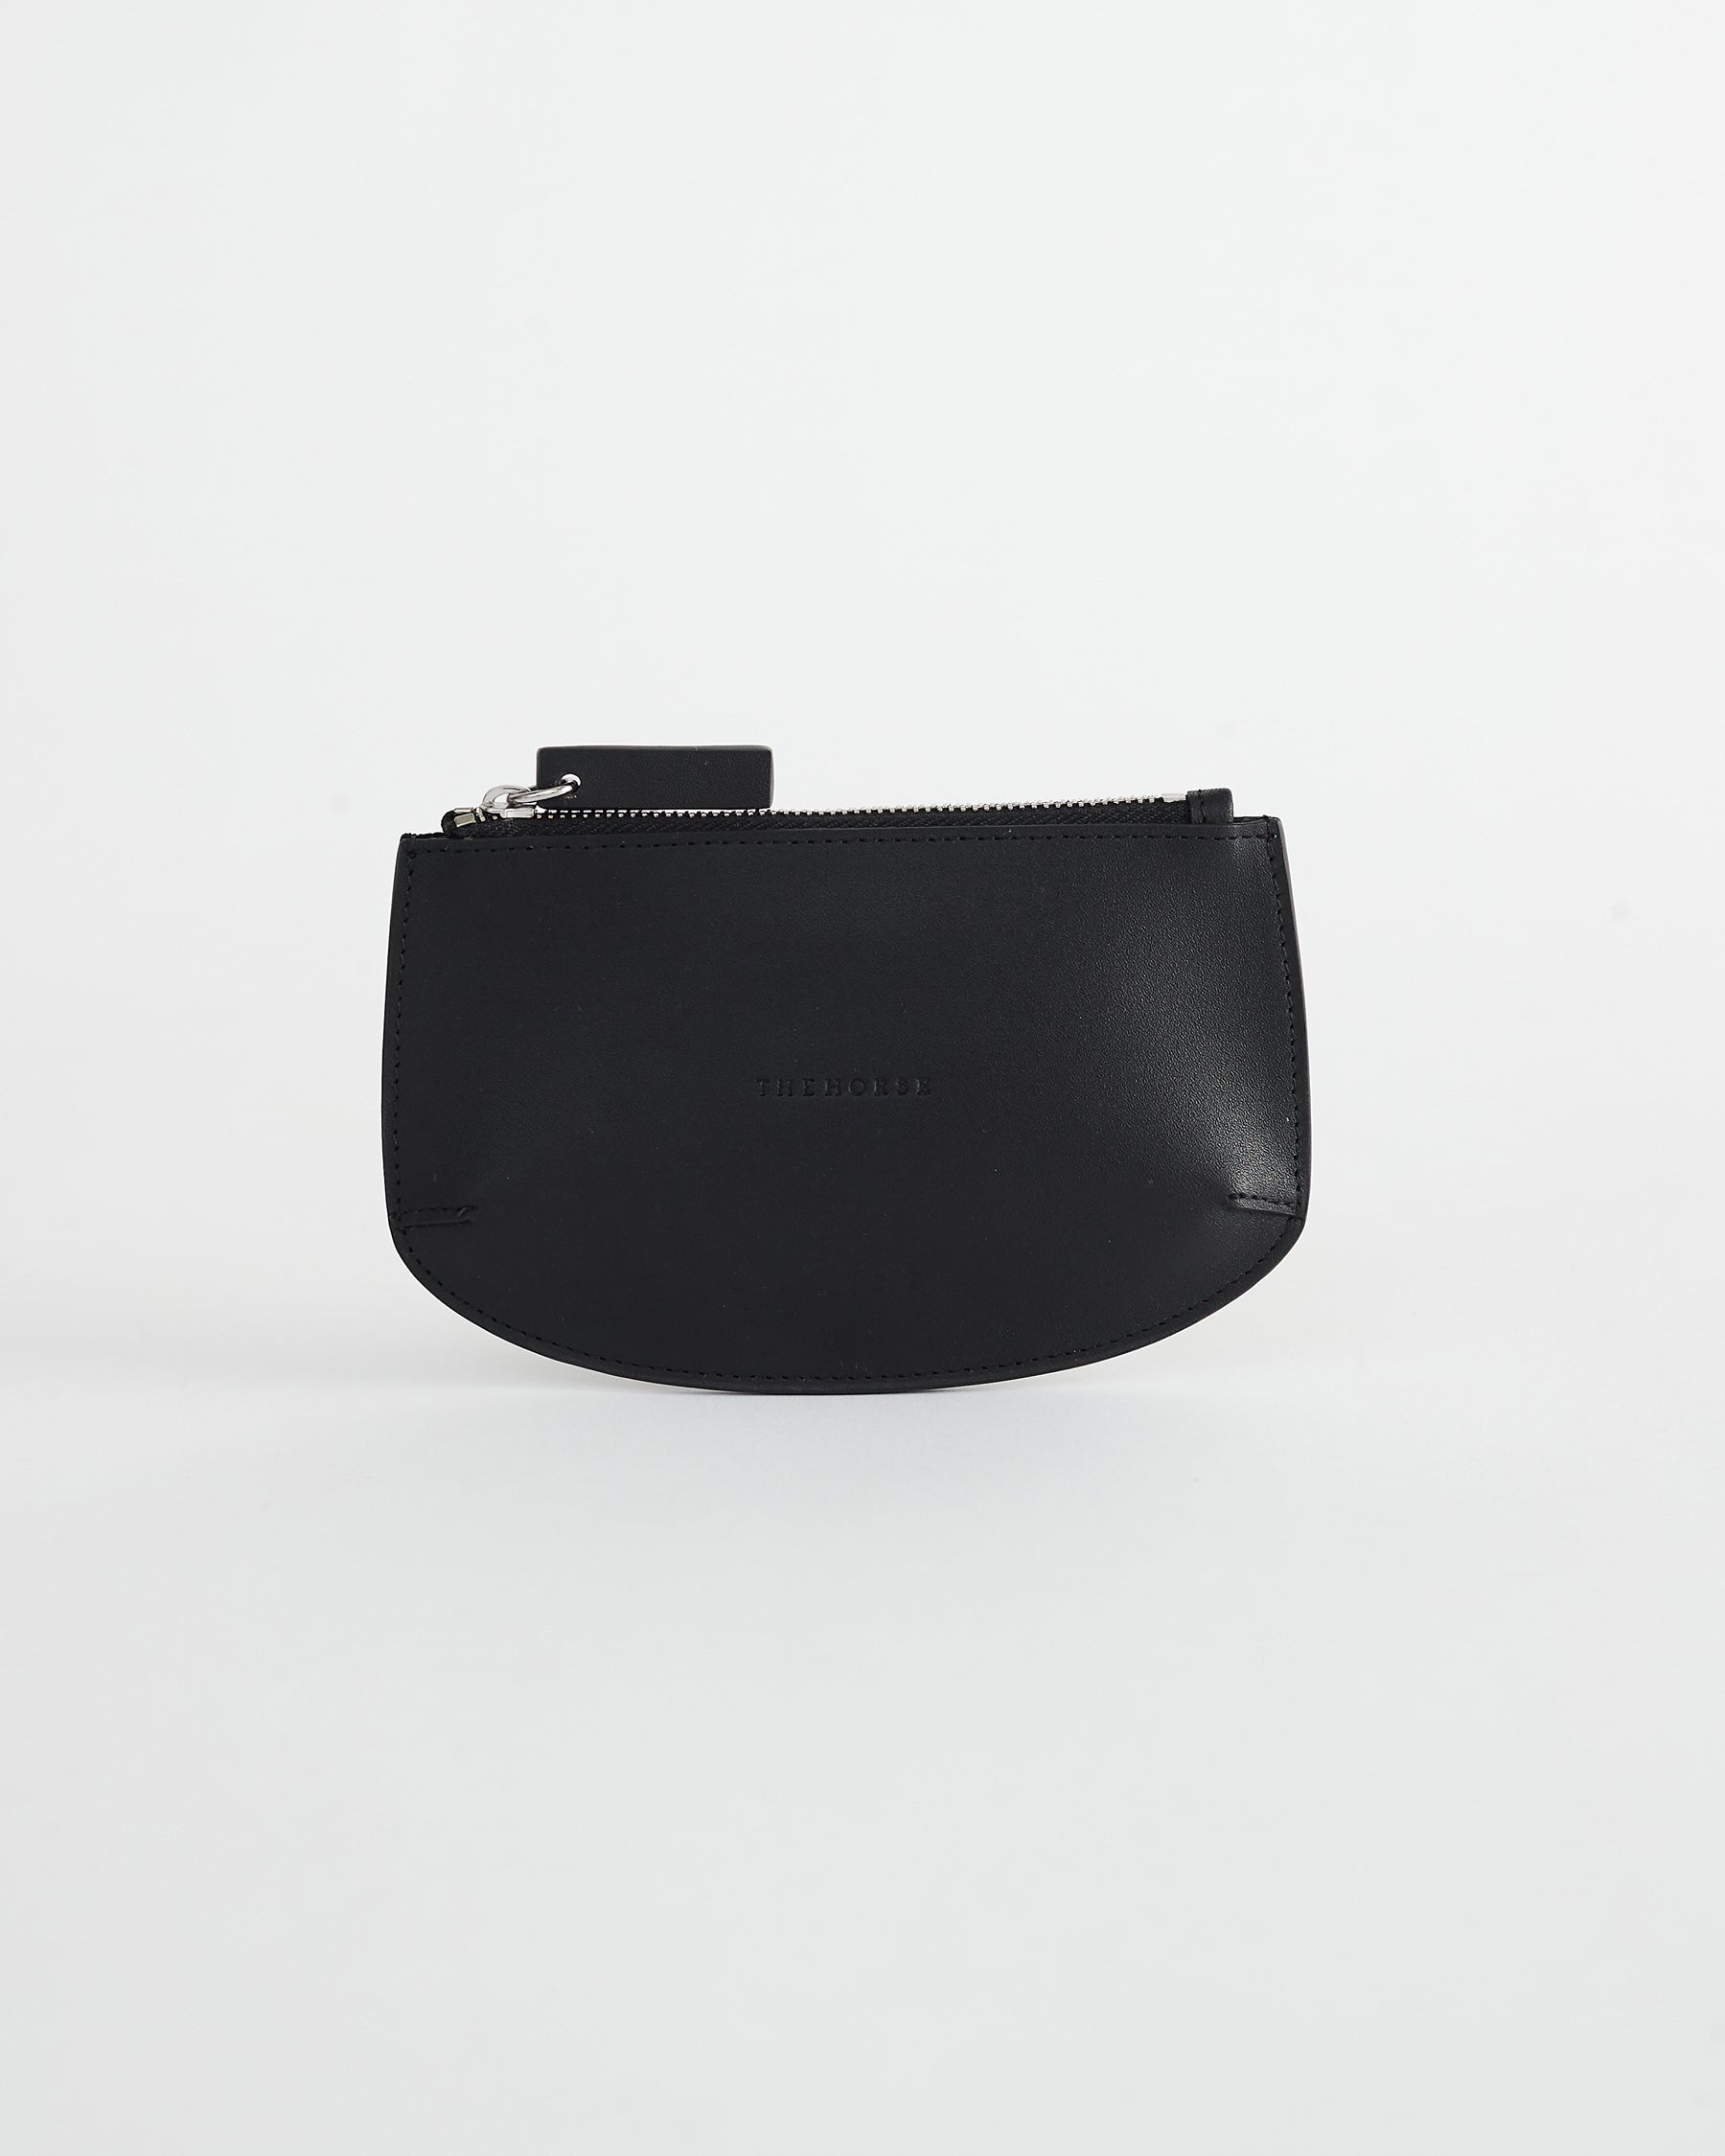 The Drew Women's Leather Zip Cardholder in Black by The Horse®